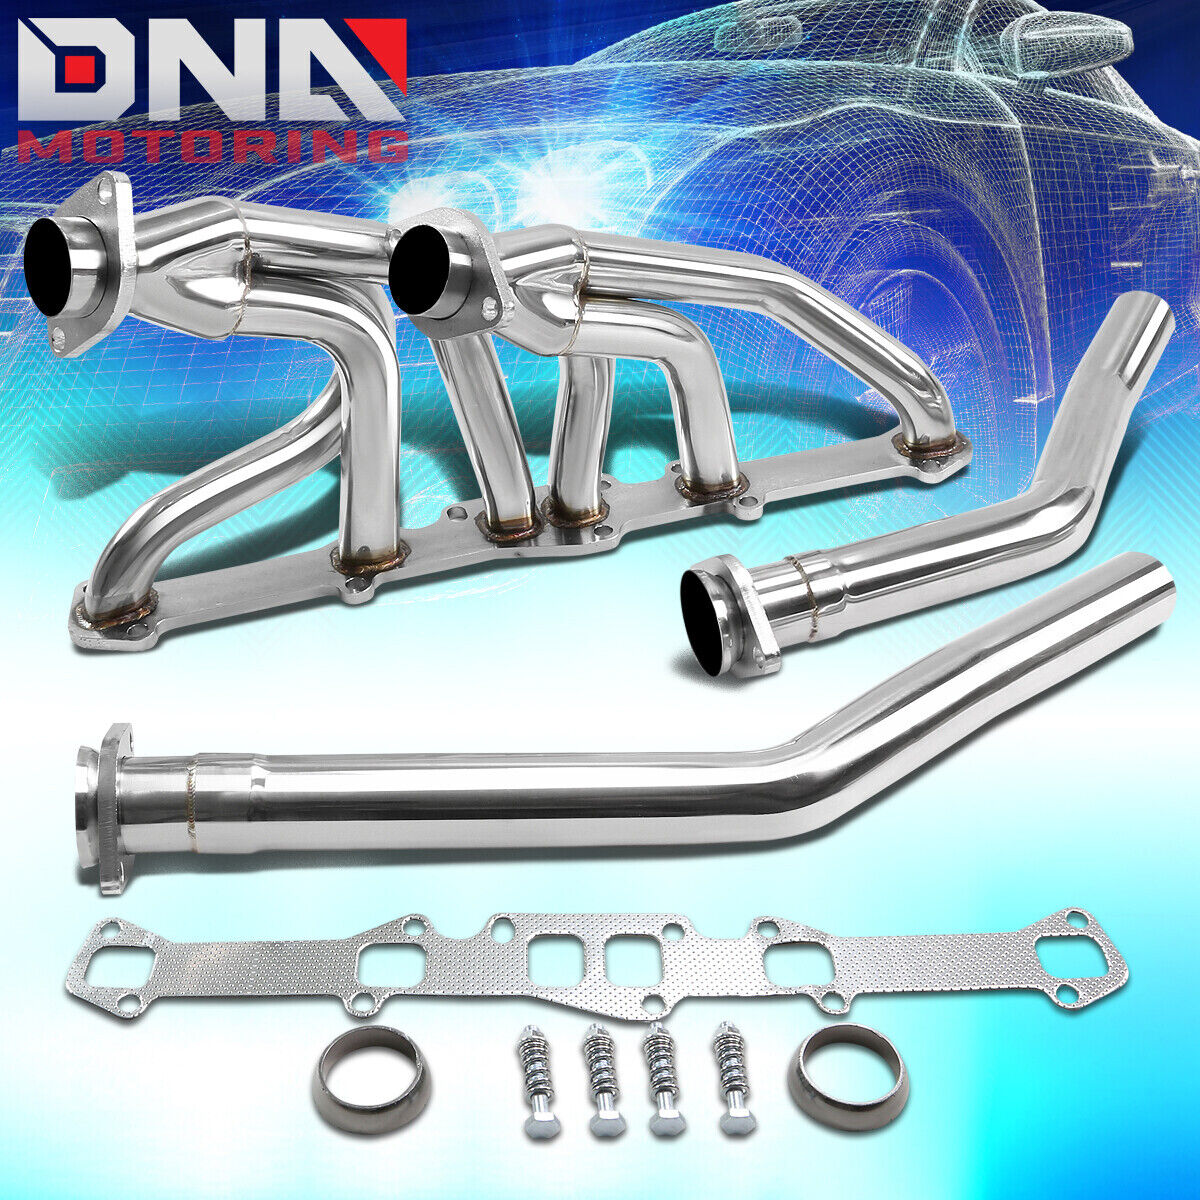 FOR FORD/MERCURY 144/170/200/250 CID l6 STAINLESS STEEL HEADER EXHAUST MANIFOLD